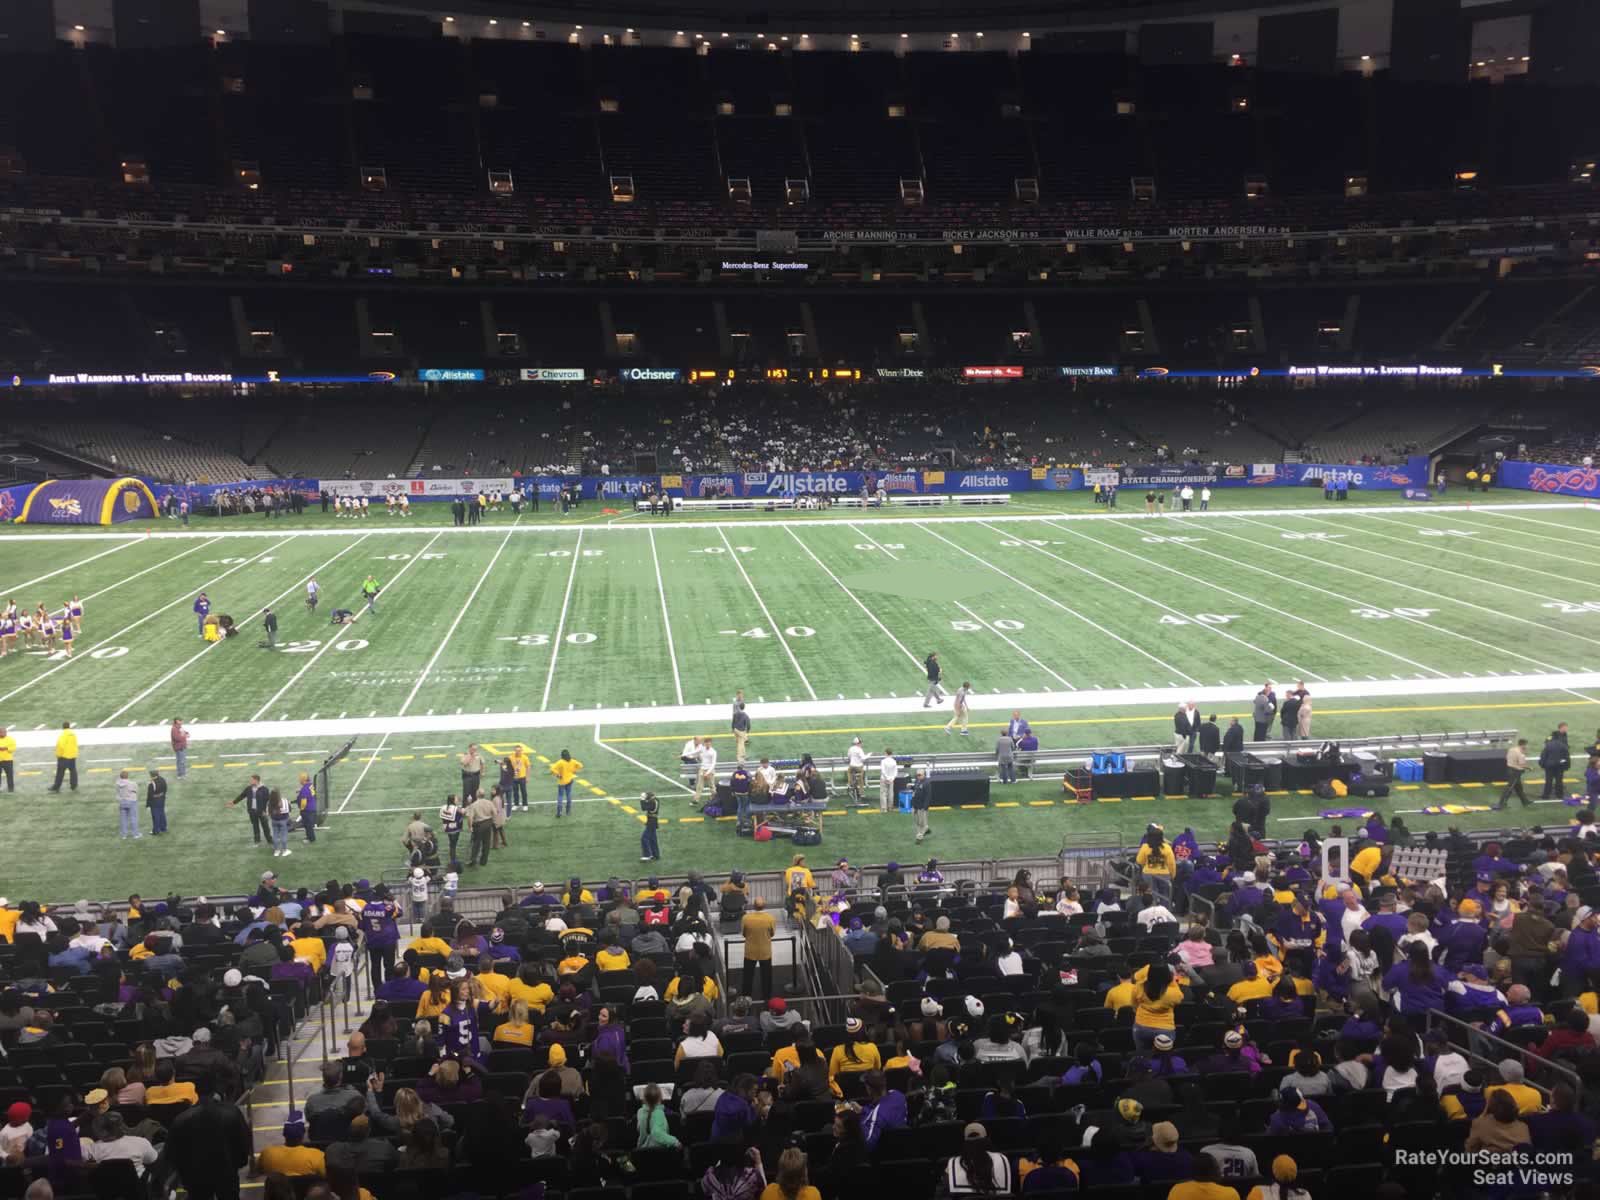 section 267, row 2 seat view  for football - caesars superdome